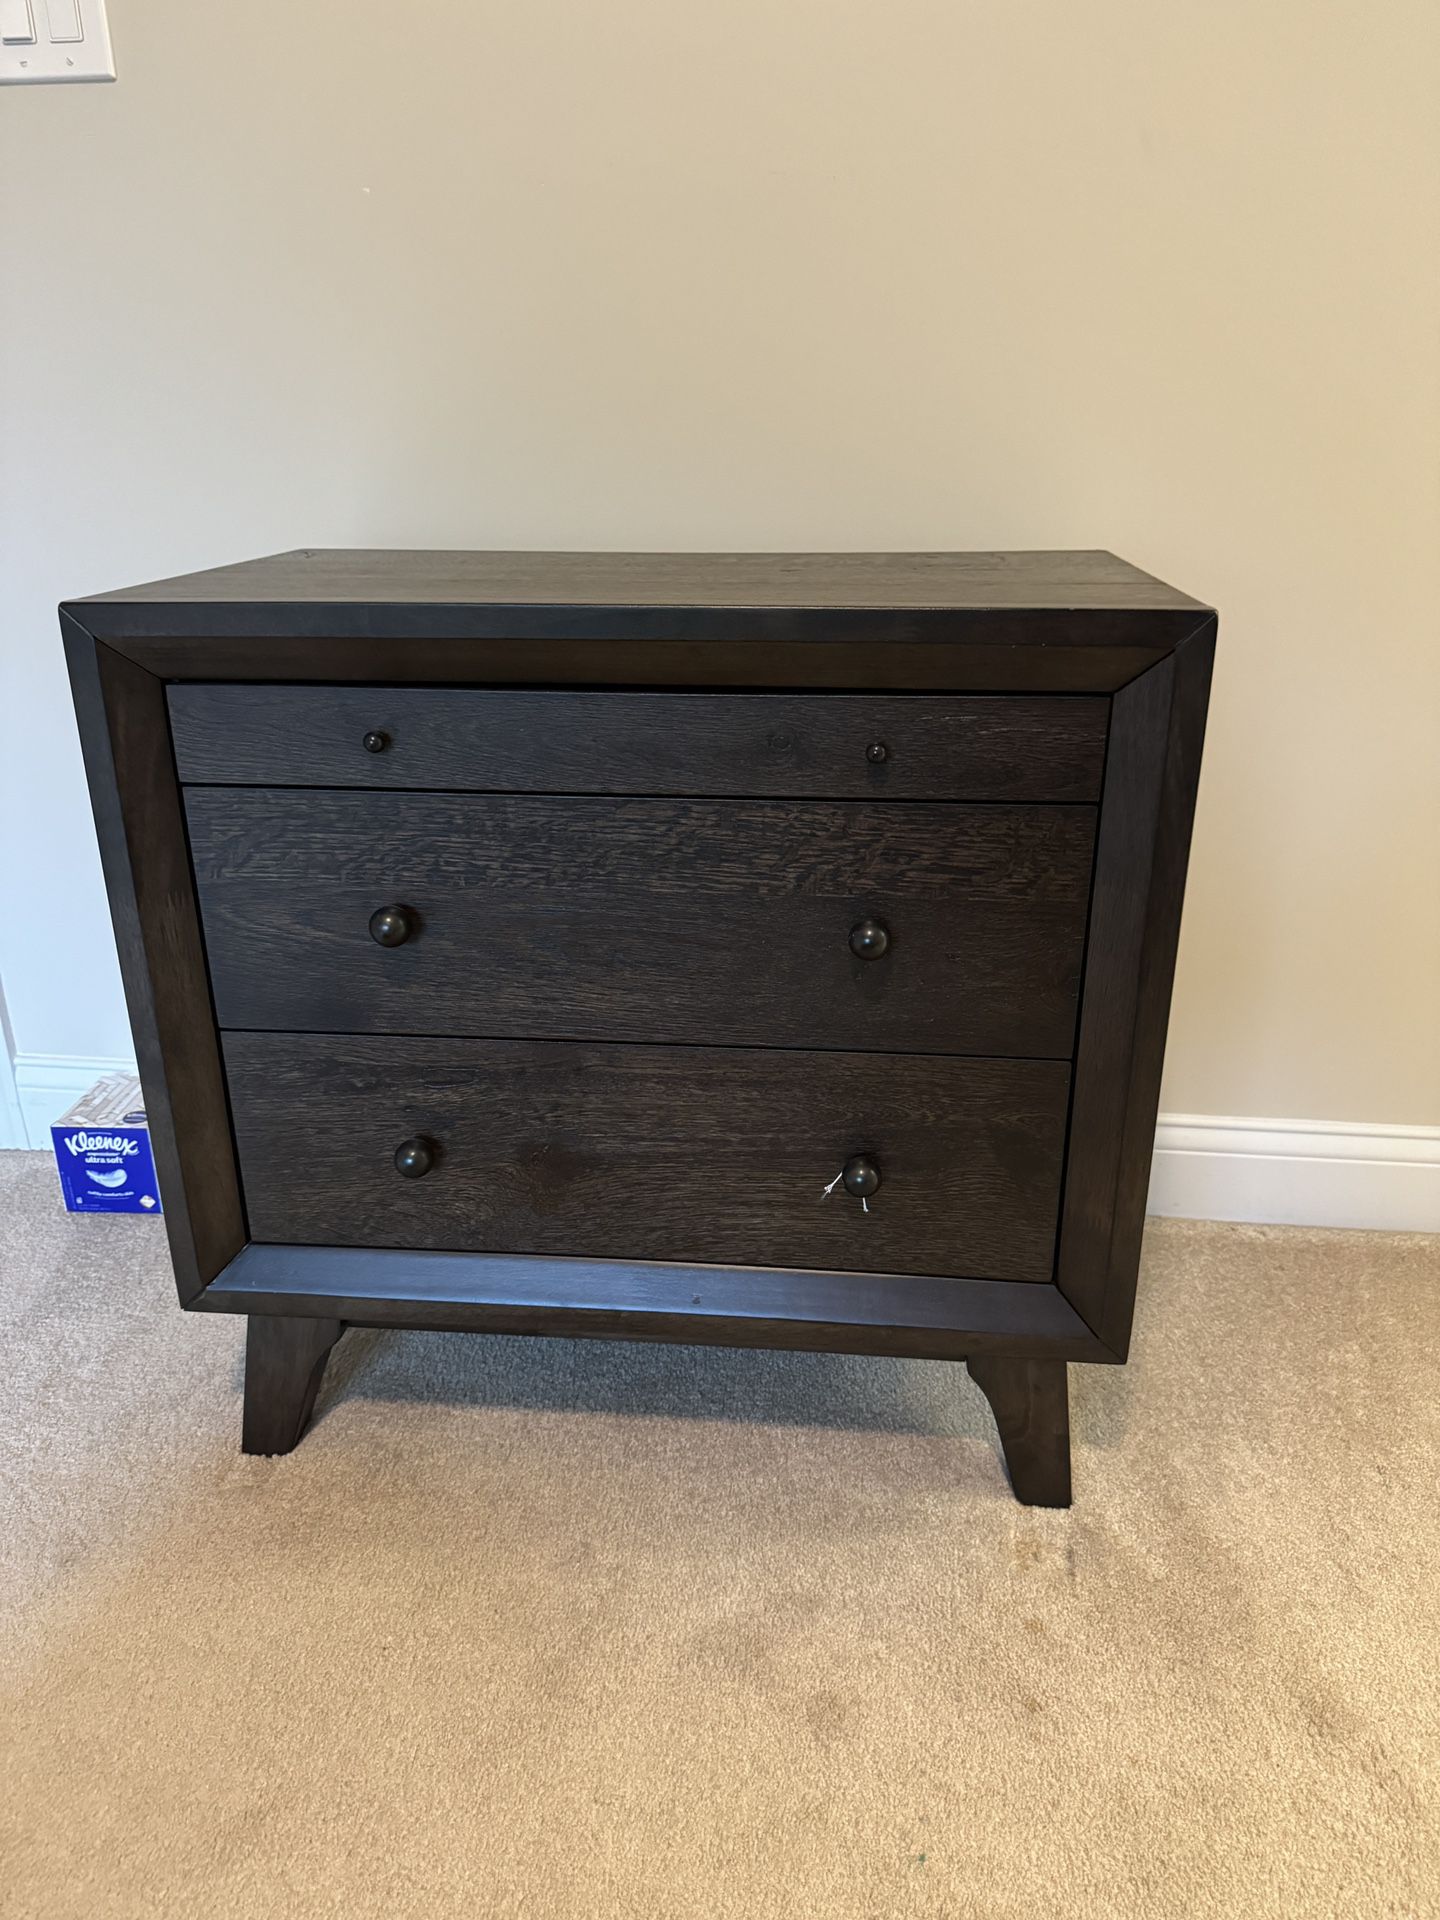 two nightstands with USB plugs built in